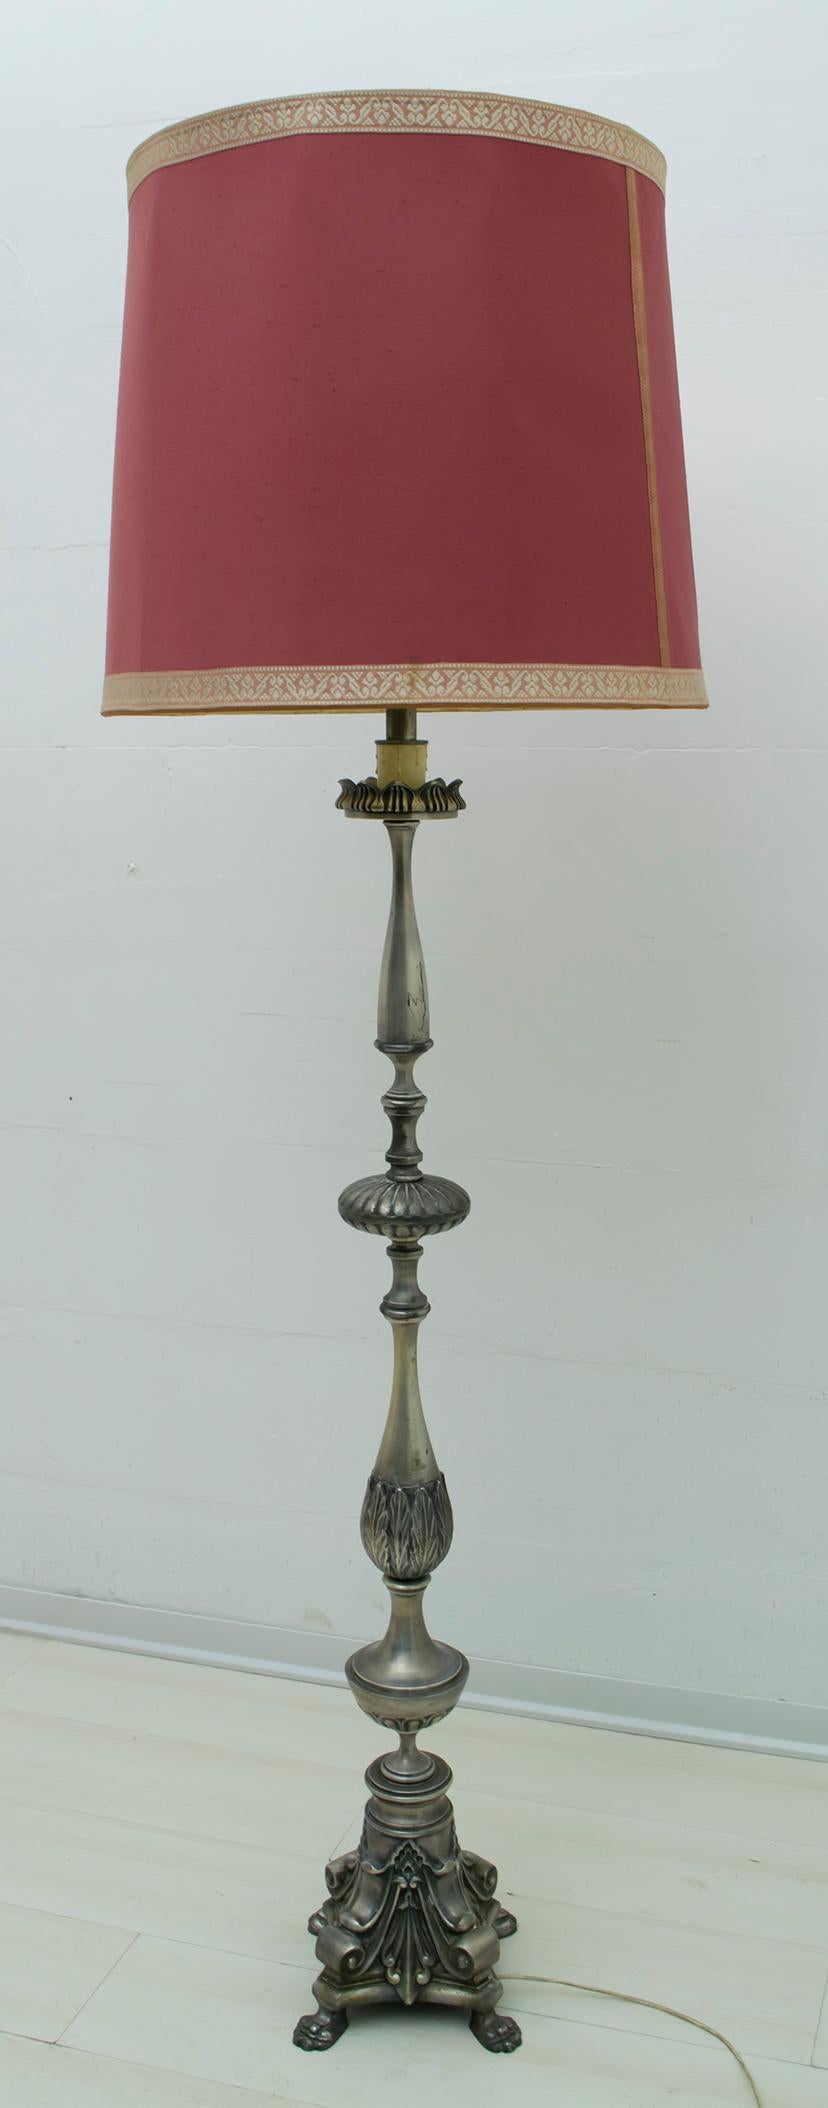 This beautiful silver plated brass floor lamp was produced in Italy in the neoclassical style.

